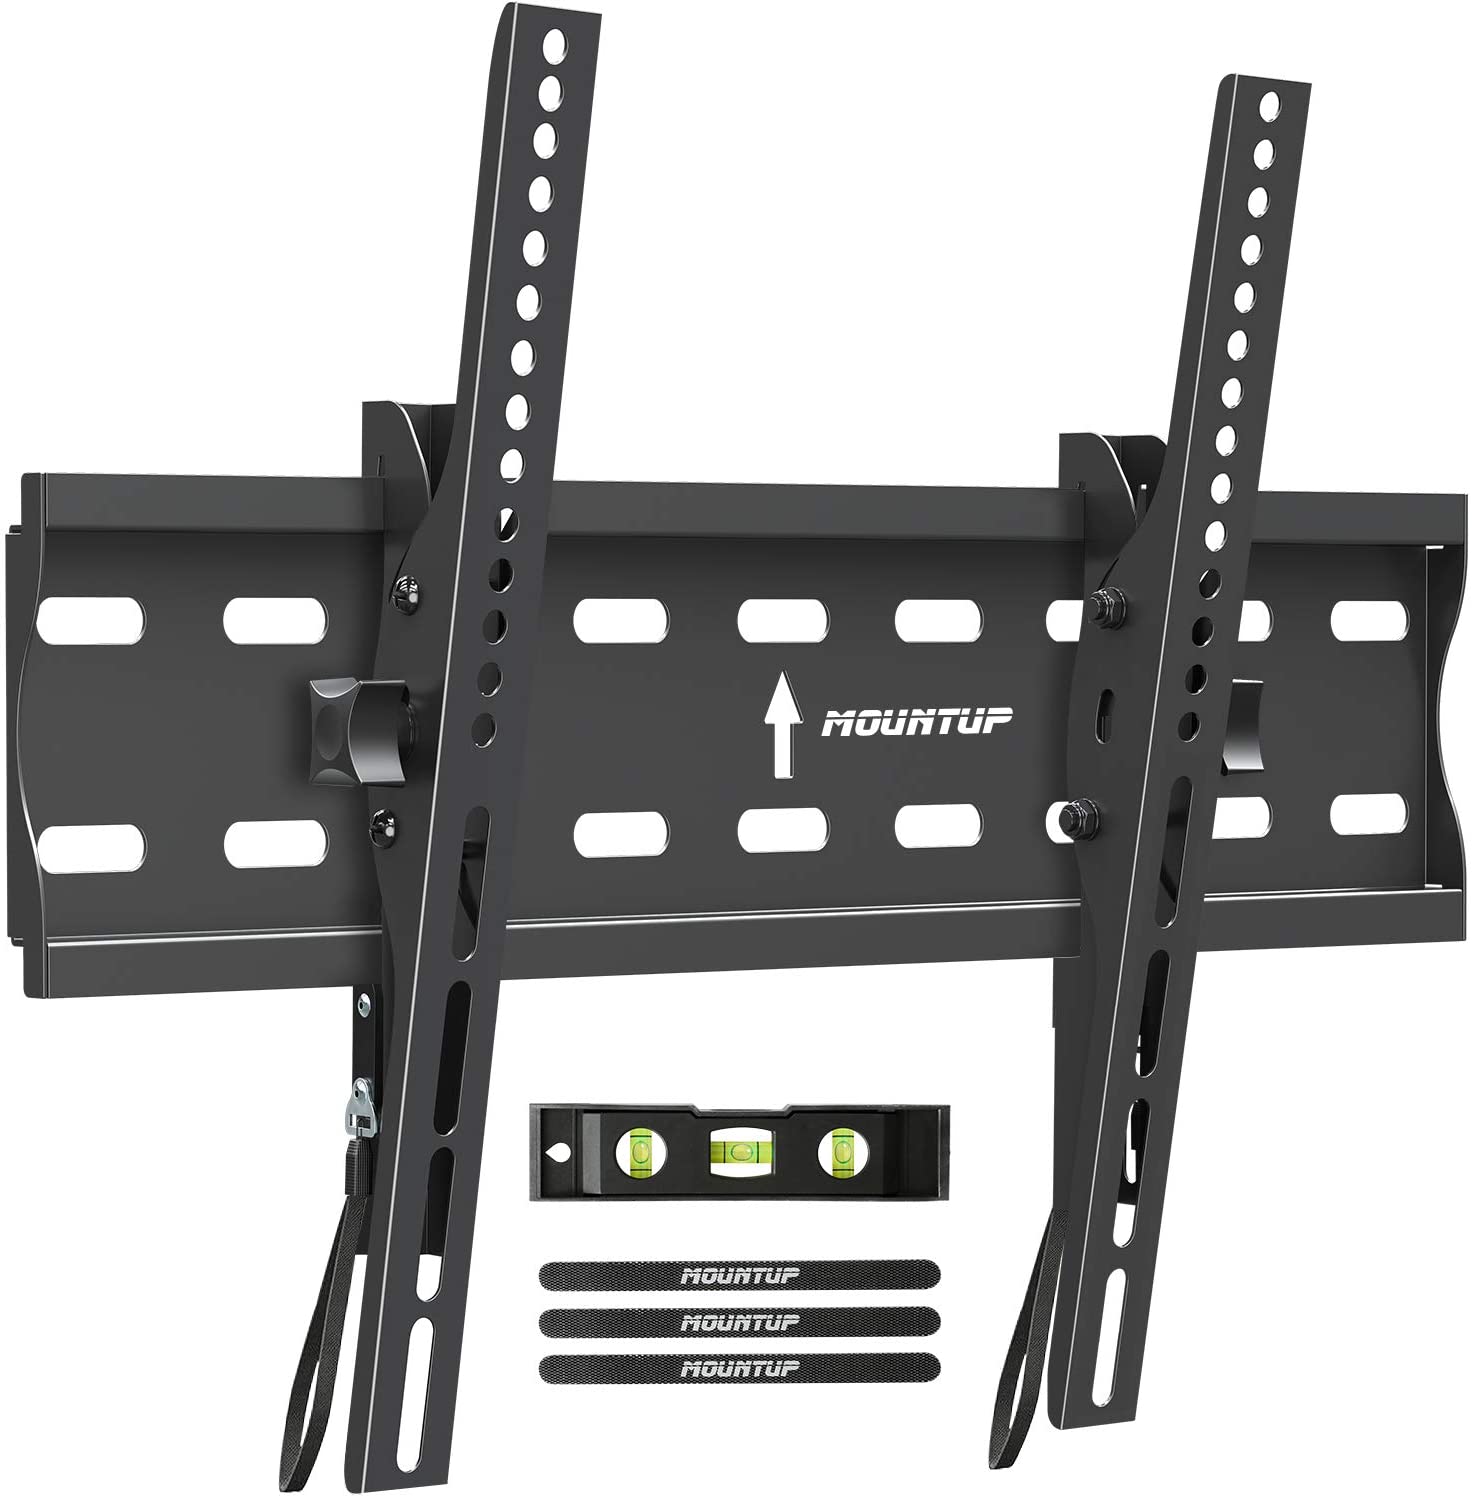 Tilting TV Wall Mount Bracket for 26-55 Inch Flat Screen TVs/Curved TVs, Low Profile TV Wall Mount TV Bracket - image 1 of 5